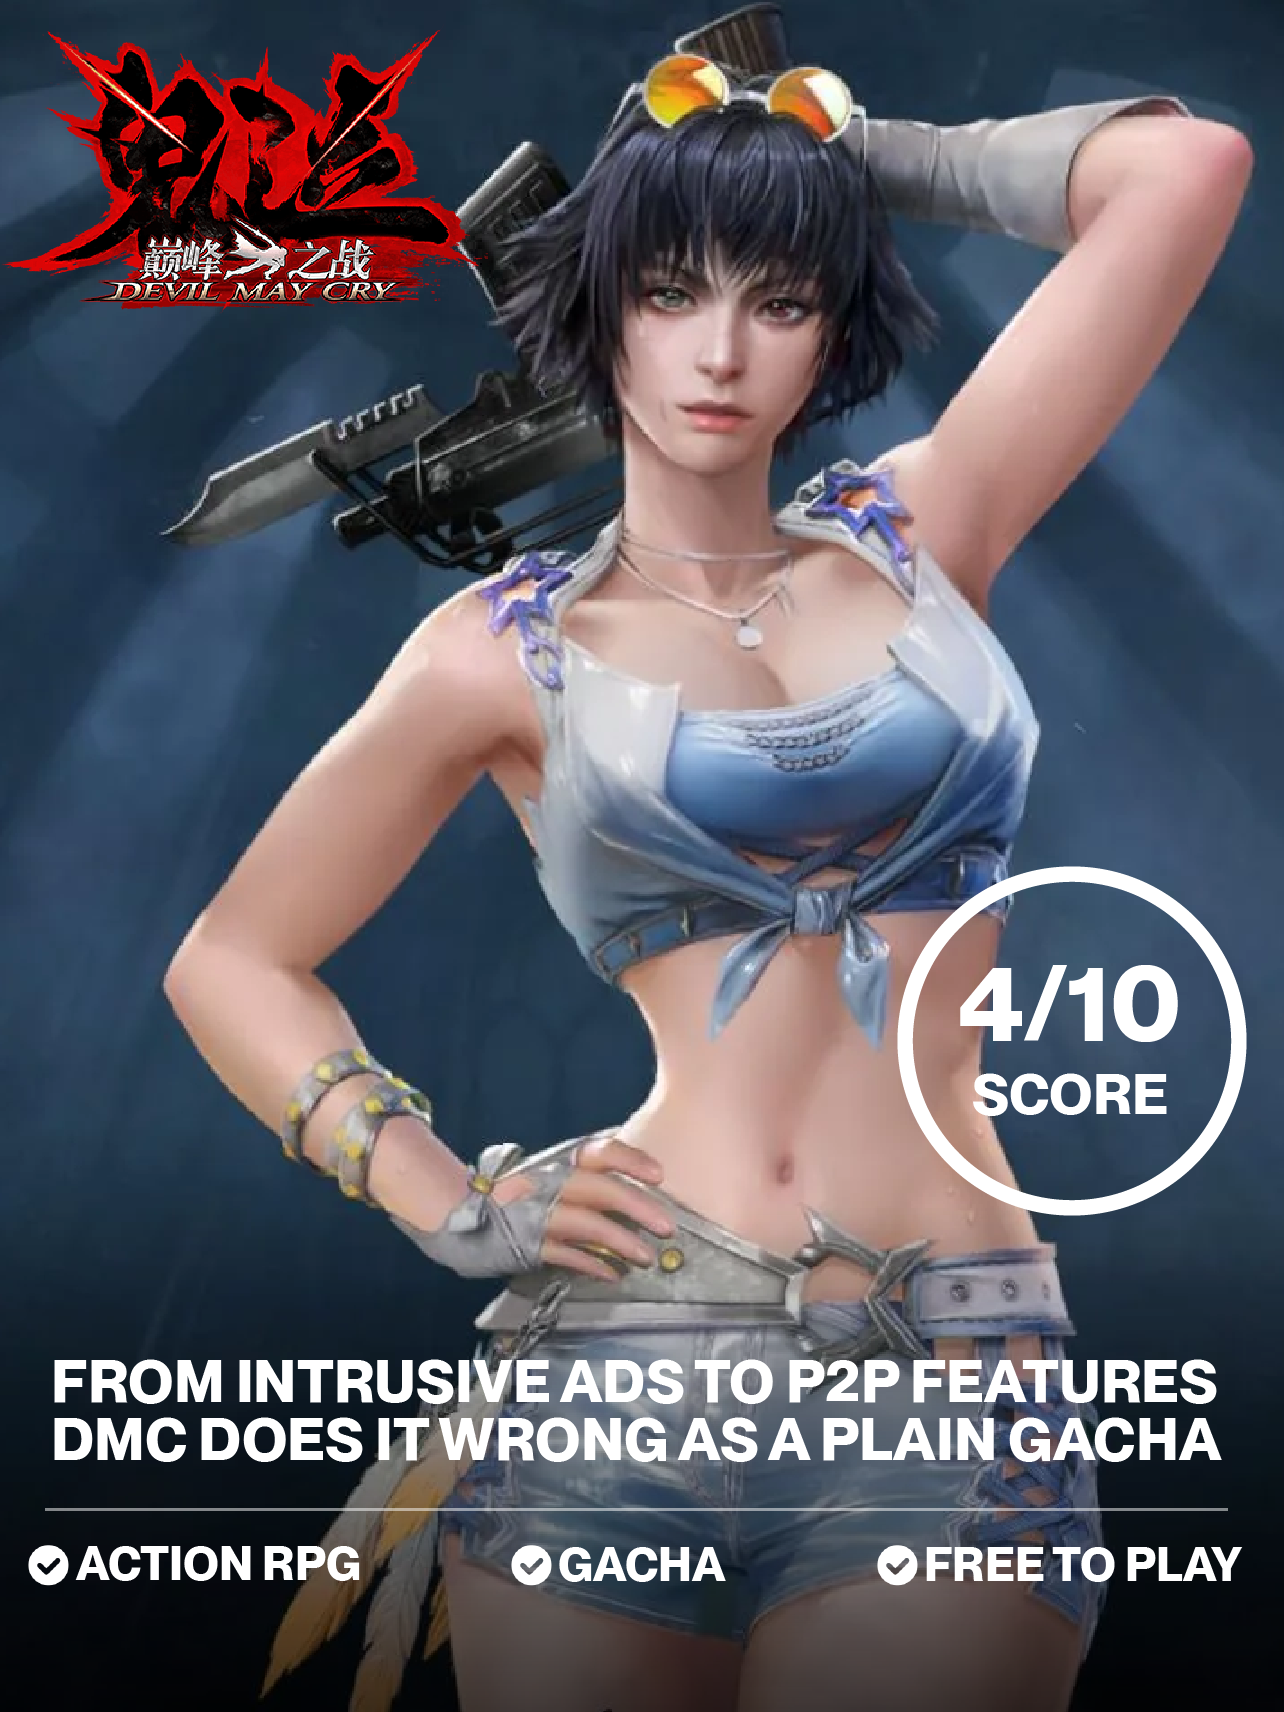 DMC PoC - I'D RATHER SPEND $79,99 ON AN ACTUAL GAME!